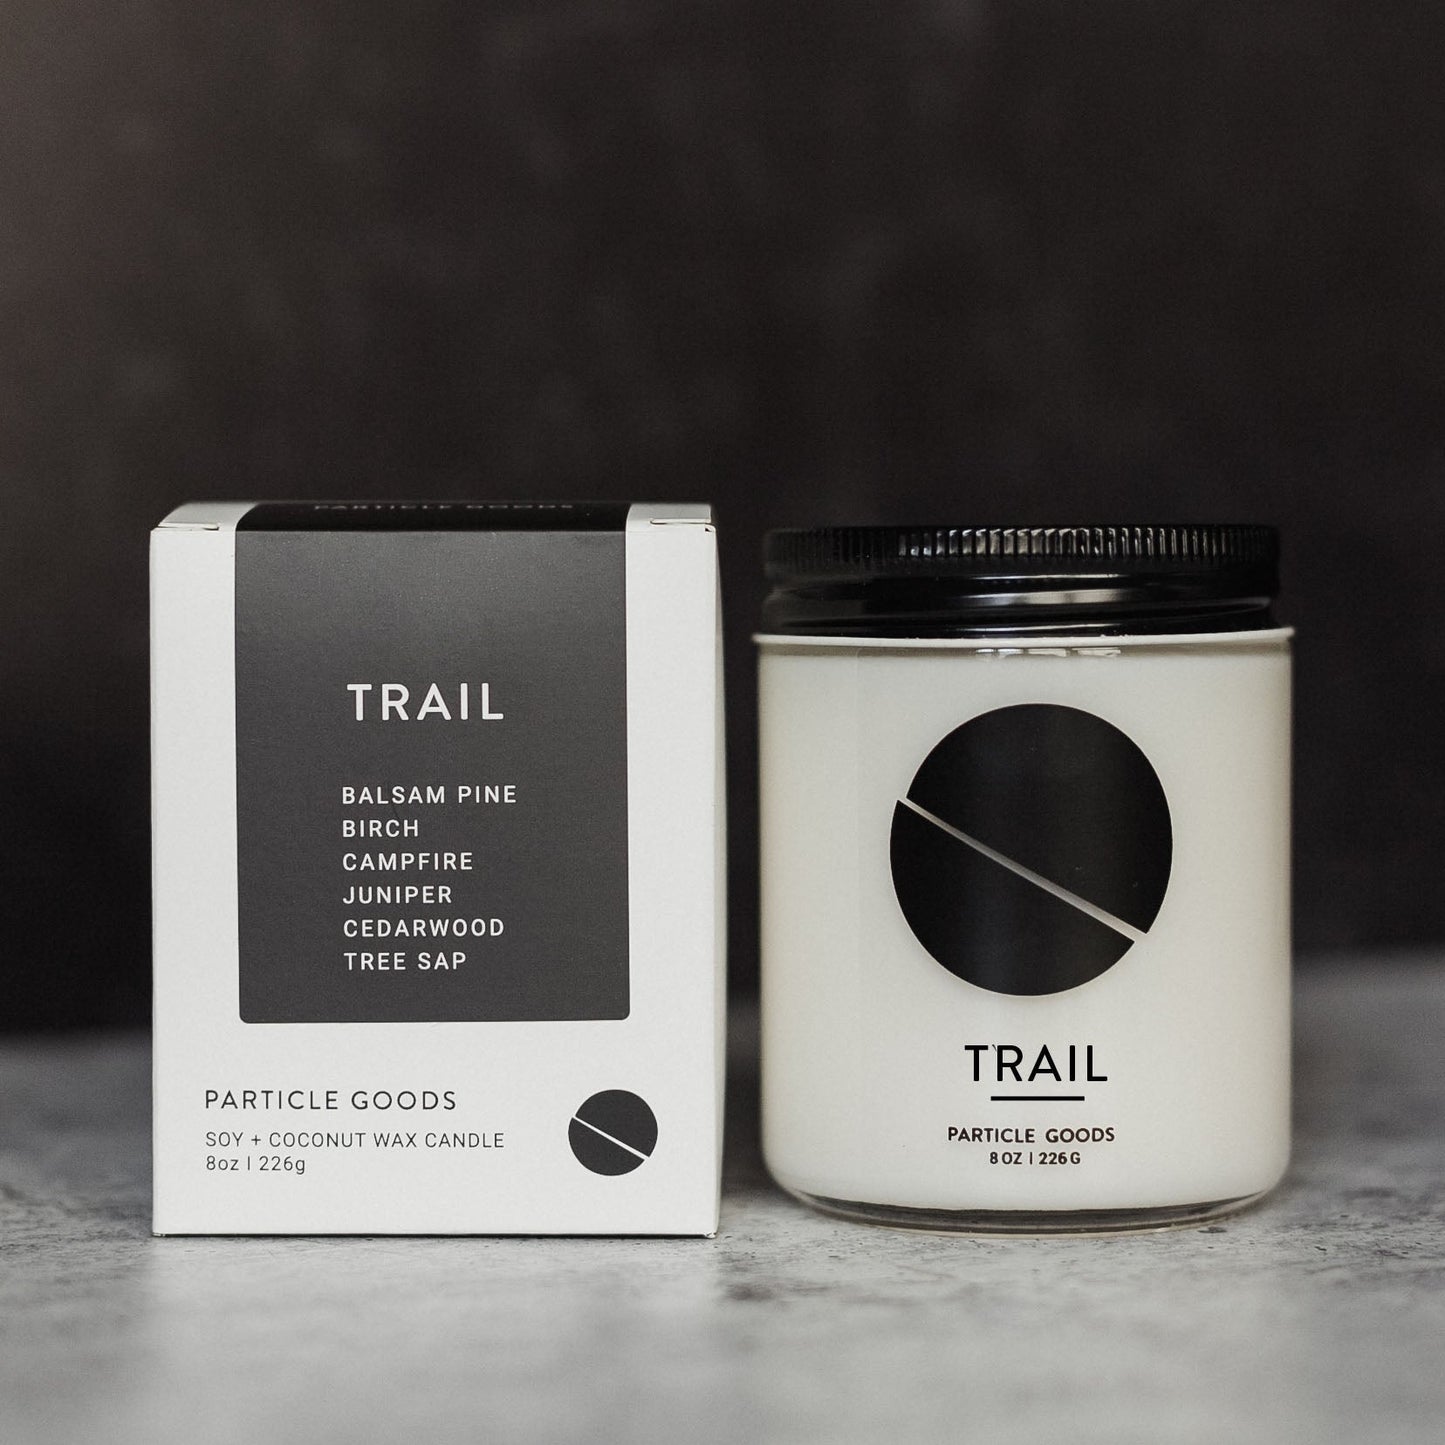 Trail candle